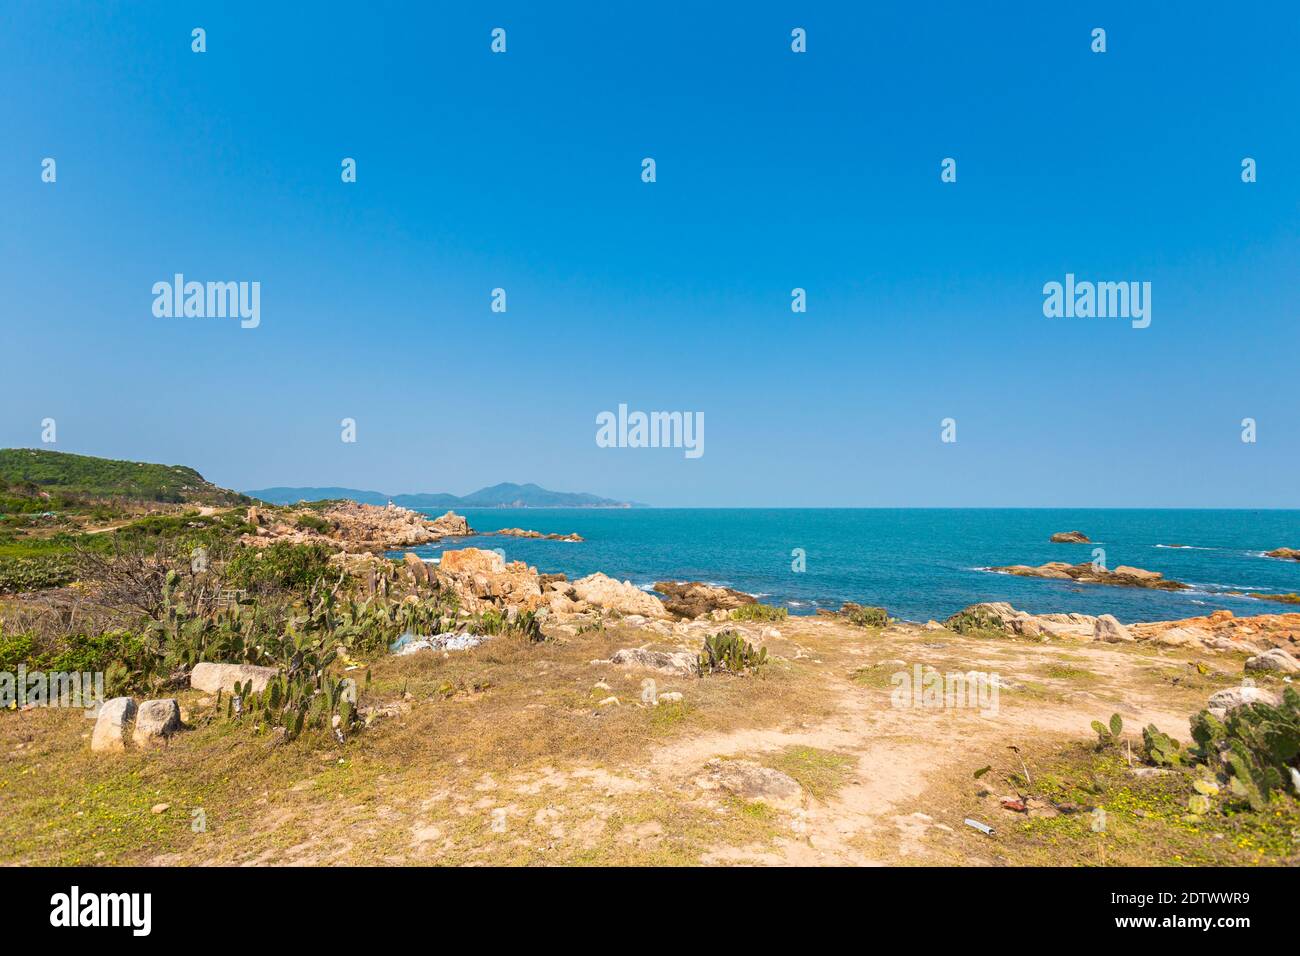 Beautiful sunny view on The Sea Cliff of Stone Plates View close to Qui Nhon and Tuy Hoa, Vietnam. Stock Photo